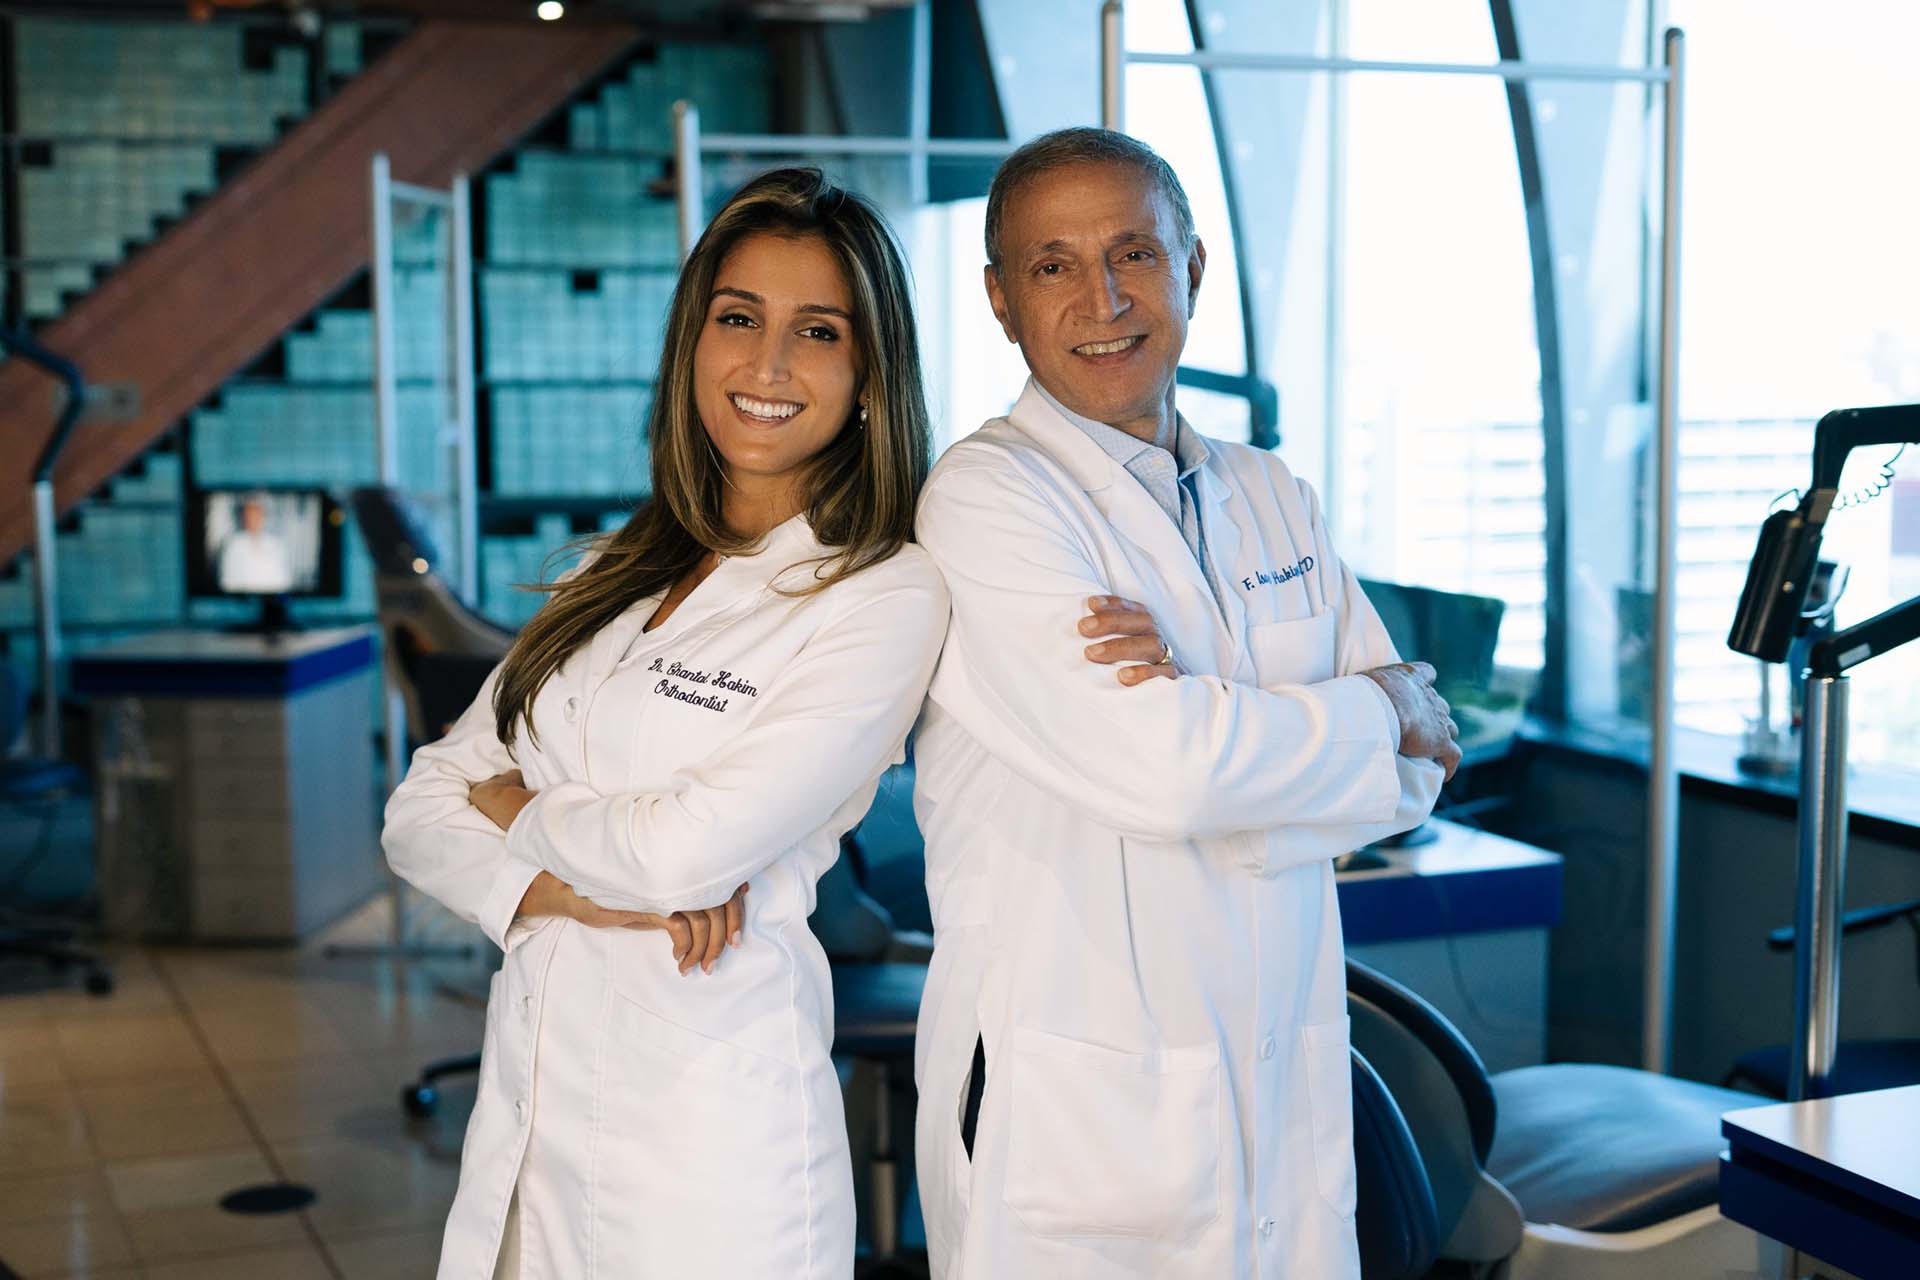 Dr. Chantal Hakim and Dr. F. Isaac Hakim at the Orthospaceship in Los Angeles, a Southern California orthodontic practice serving Westwood, Los Angeles.